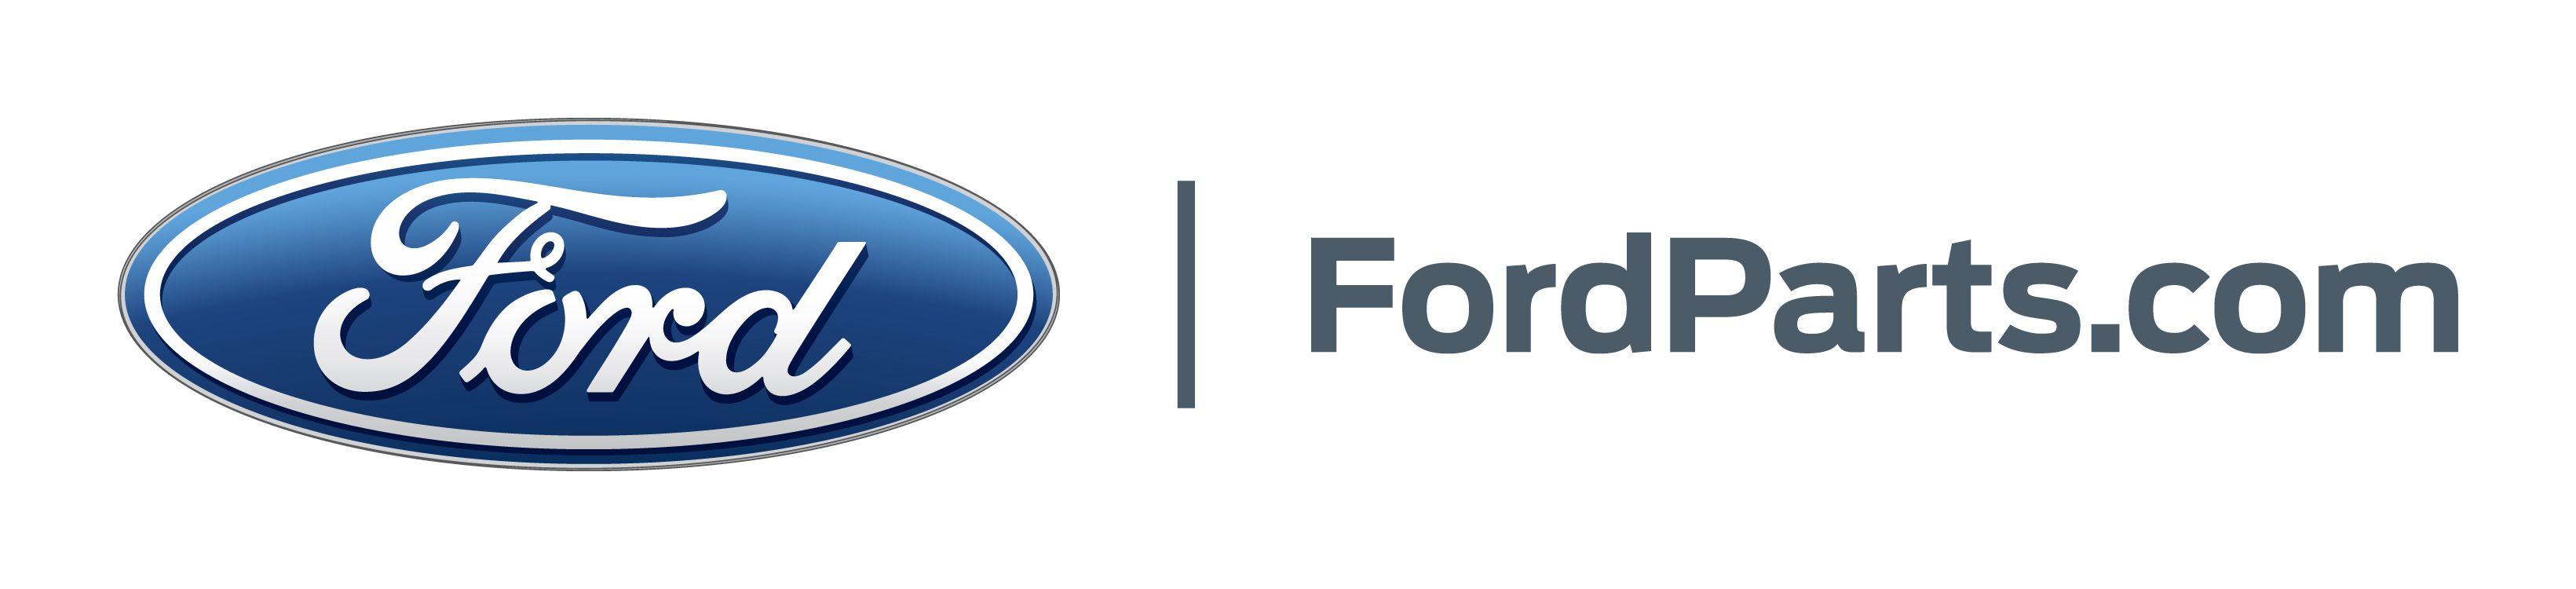 Ford.com Logo - Ford. Global Brand Protection